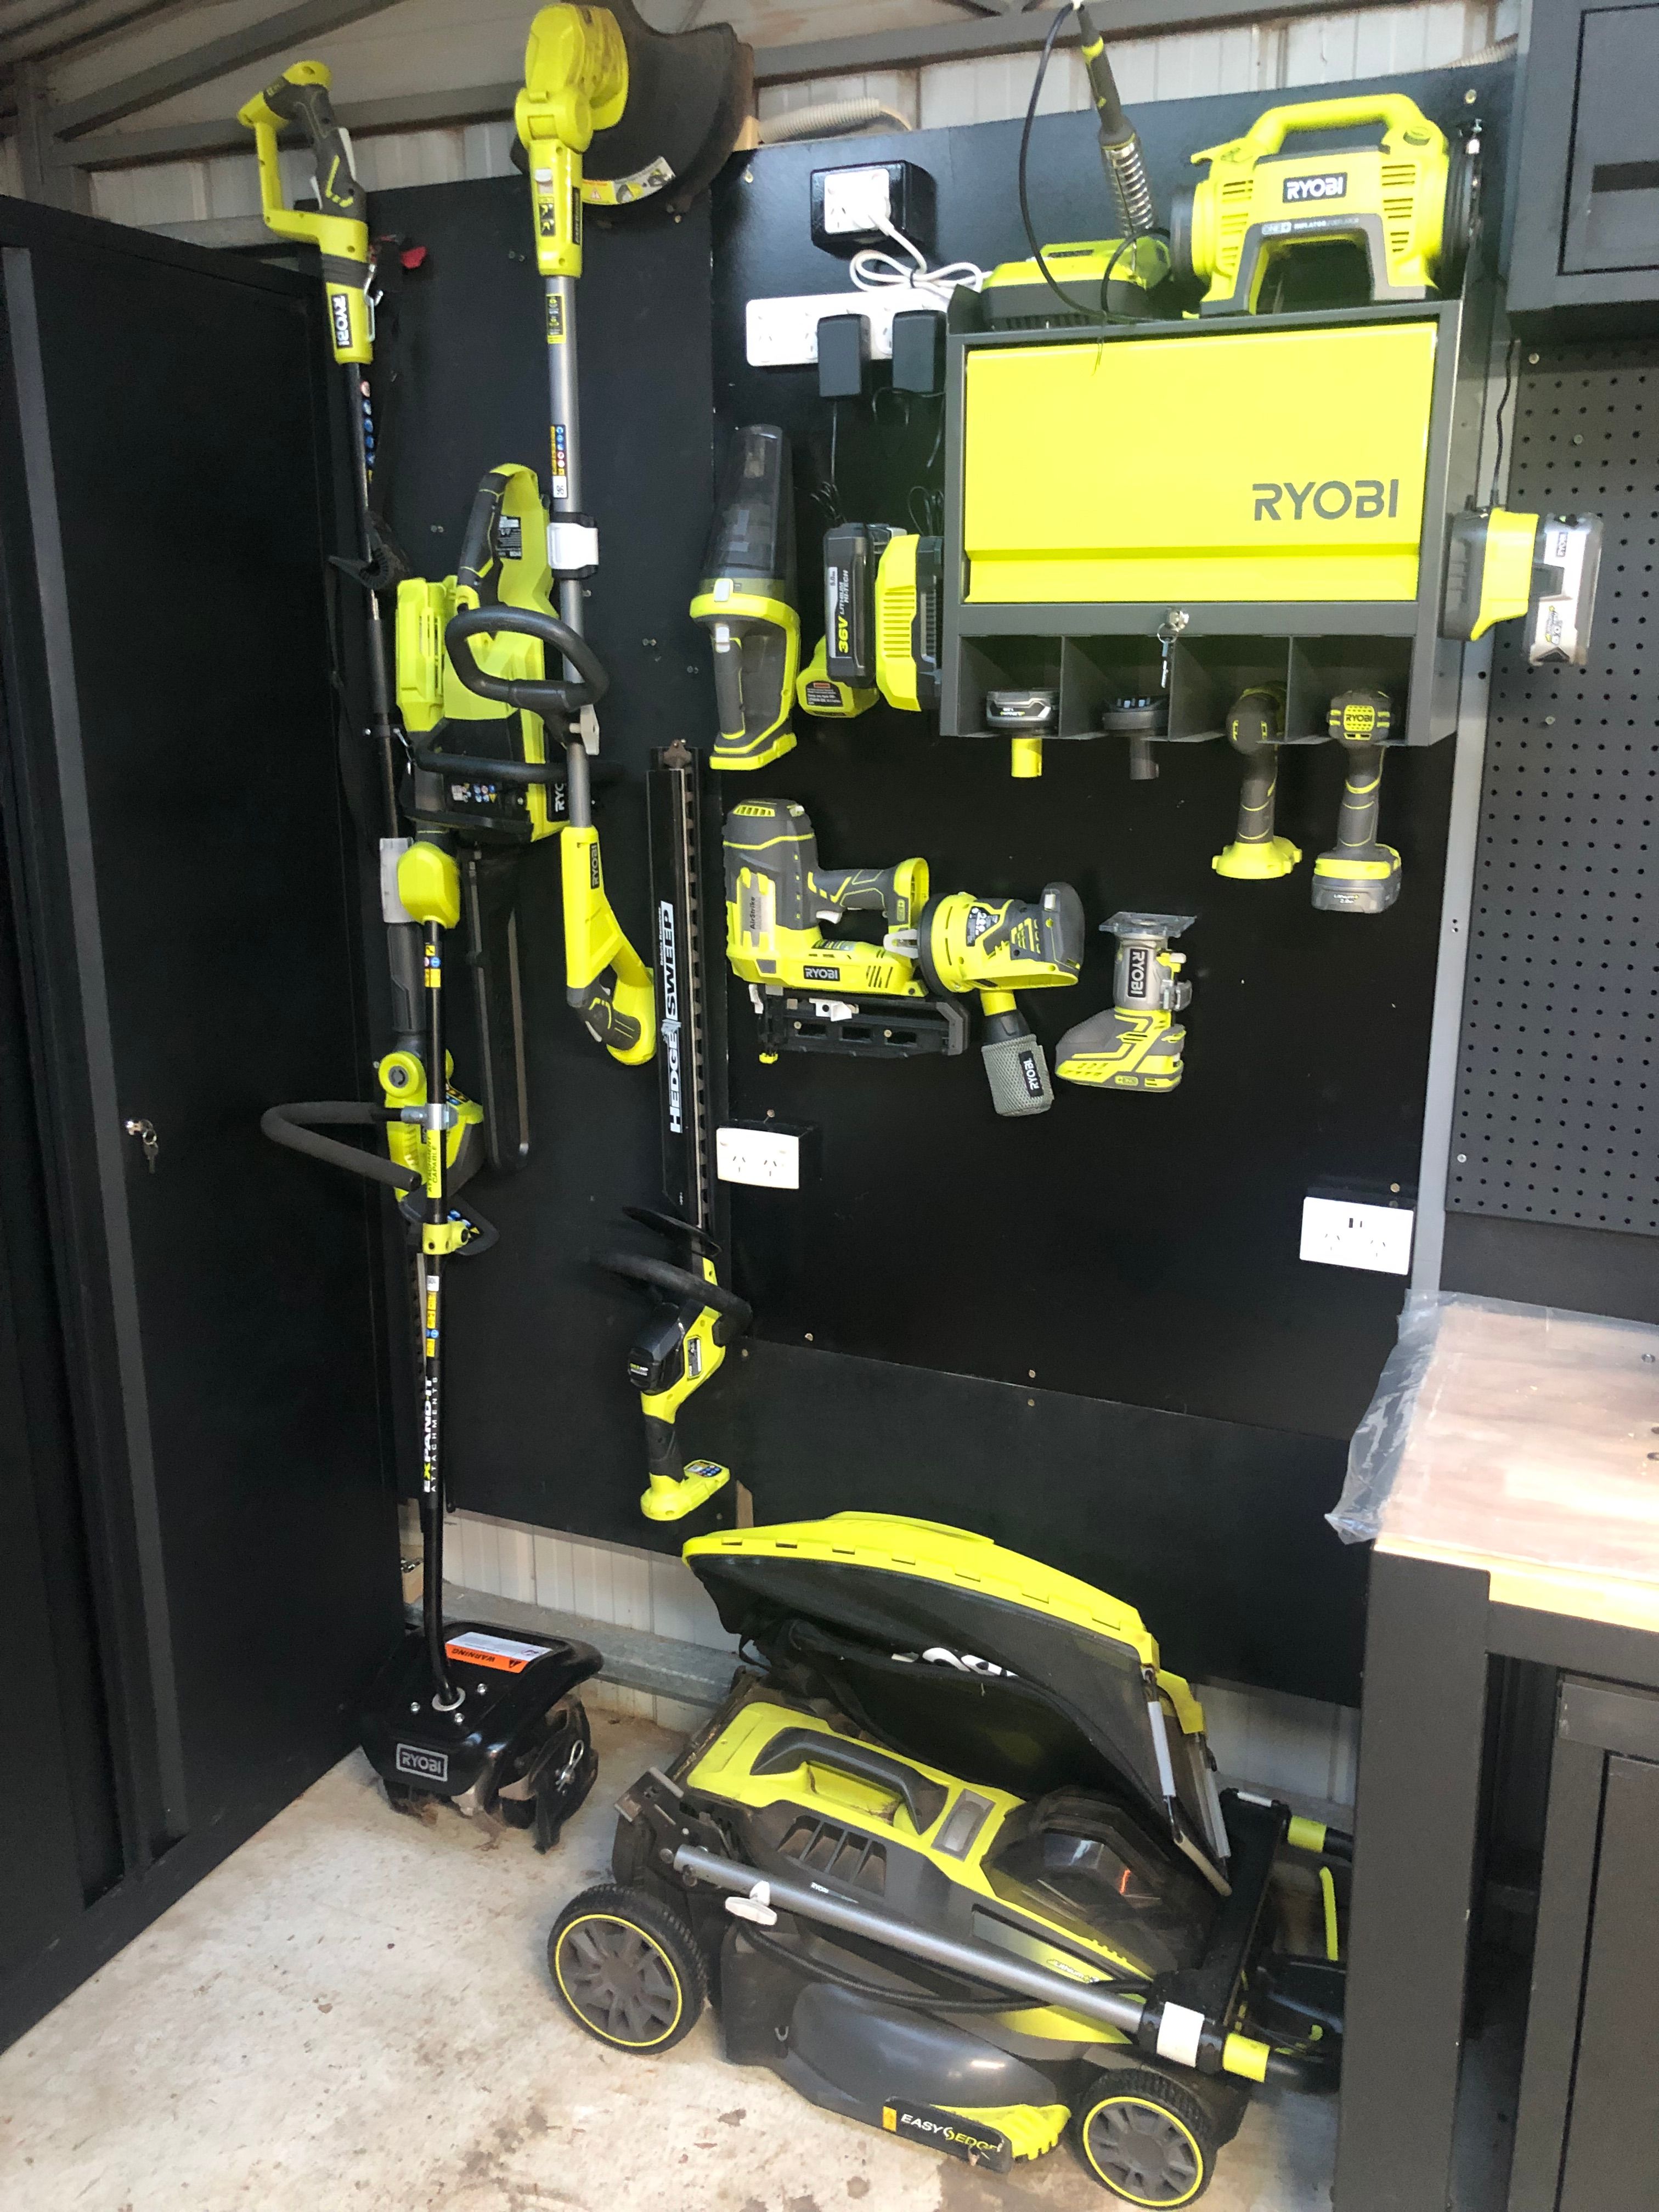 My long weekend project has been organising my Ryobi tools onto a tool board including Hanging Wall storage unit for drills/drivers and set up a charging station. Have recently added 36V tools to my 18V range with a new lawn mower, cultivator and chainsaw. which have made my gardening so much easier. Love using all my Ryobi products.